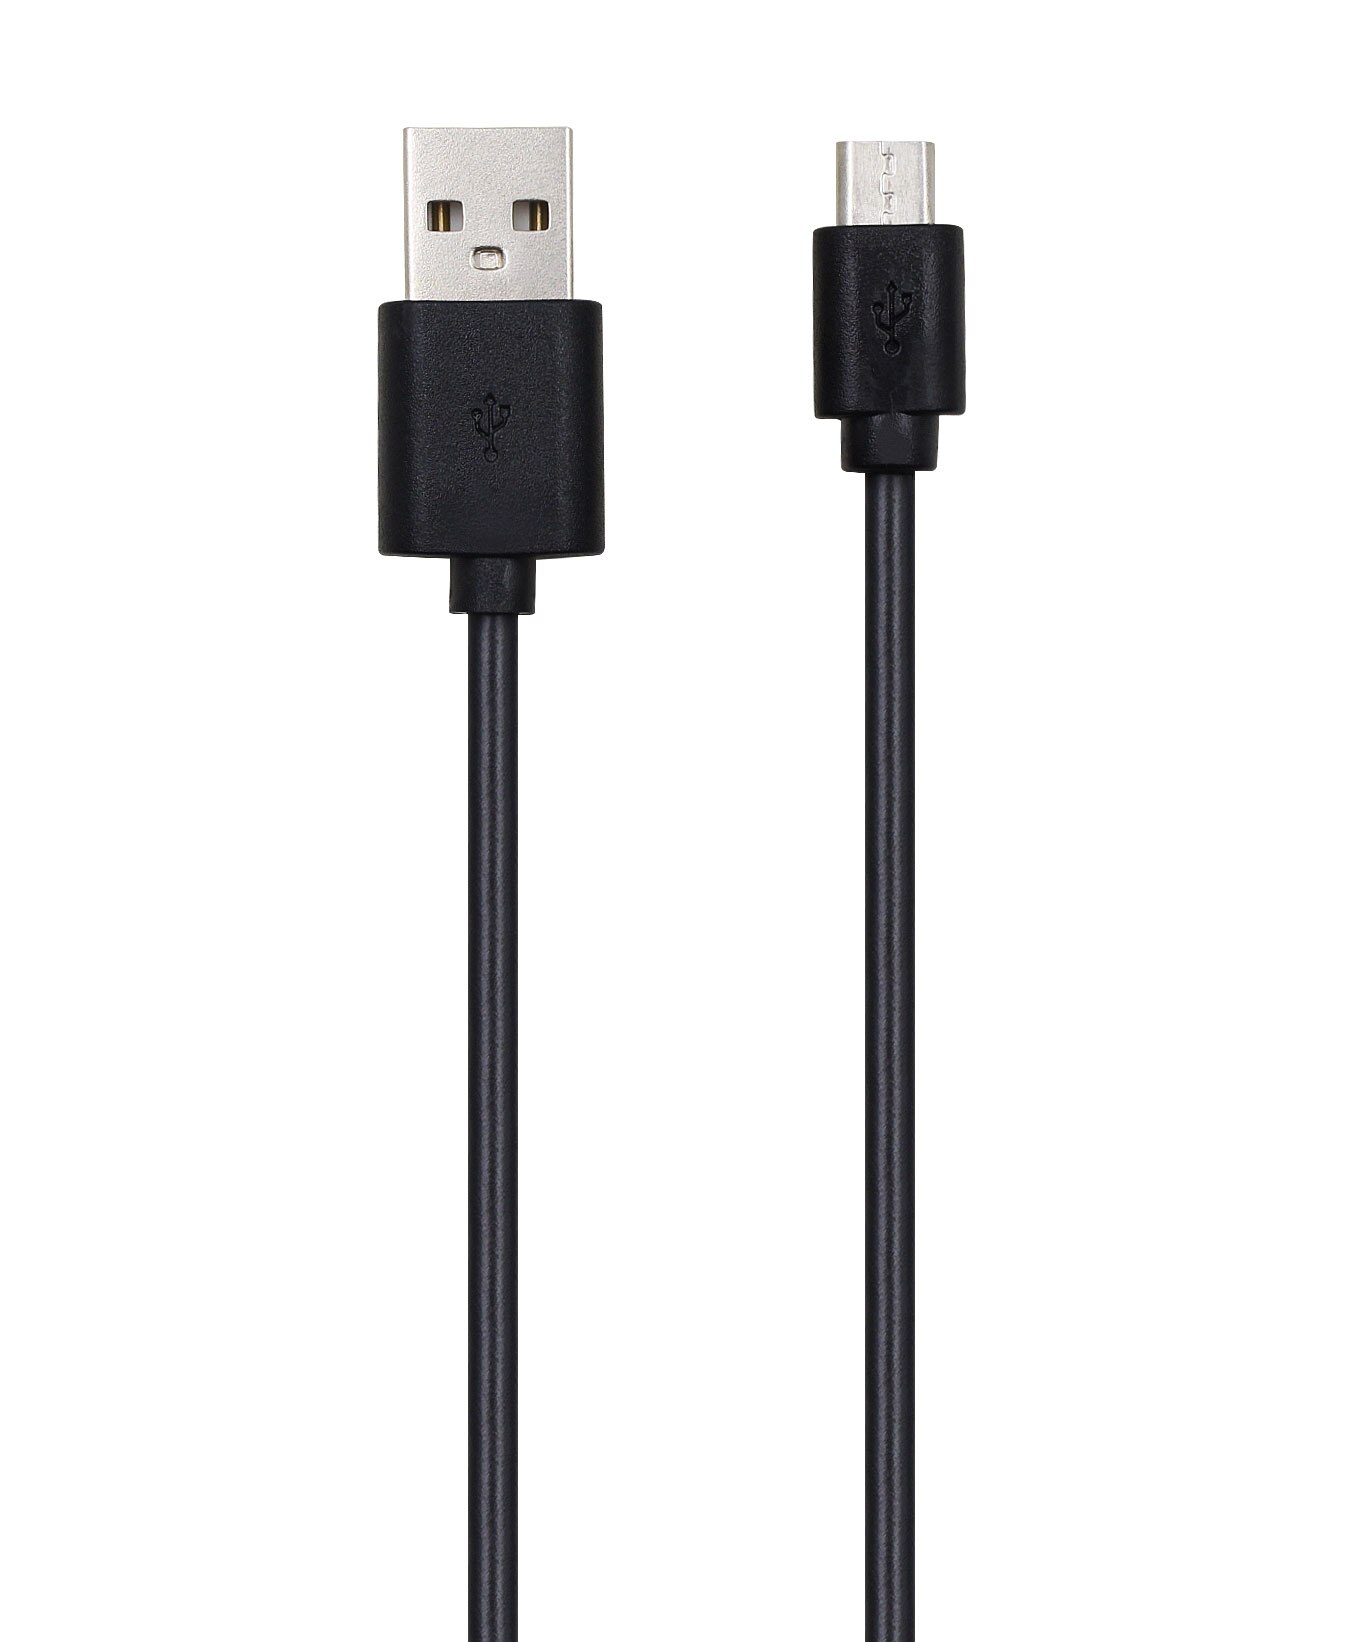 2M USB Charger + Data SYNC Cable Koord Voor Lenovo IdeaTab A8-50 A5500 F/L Tablet PC